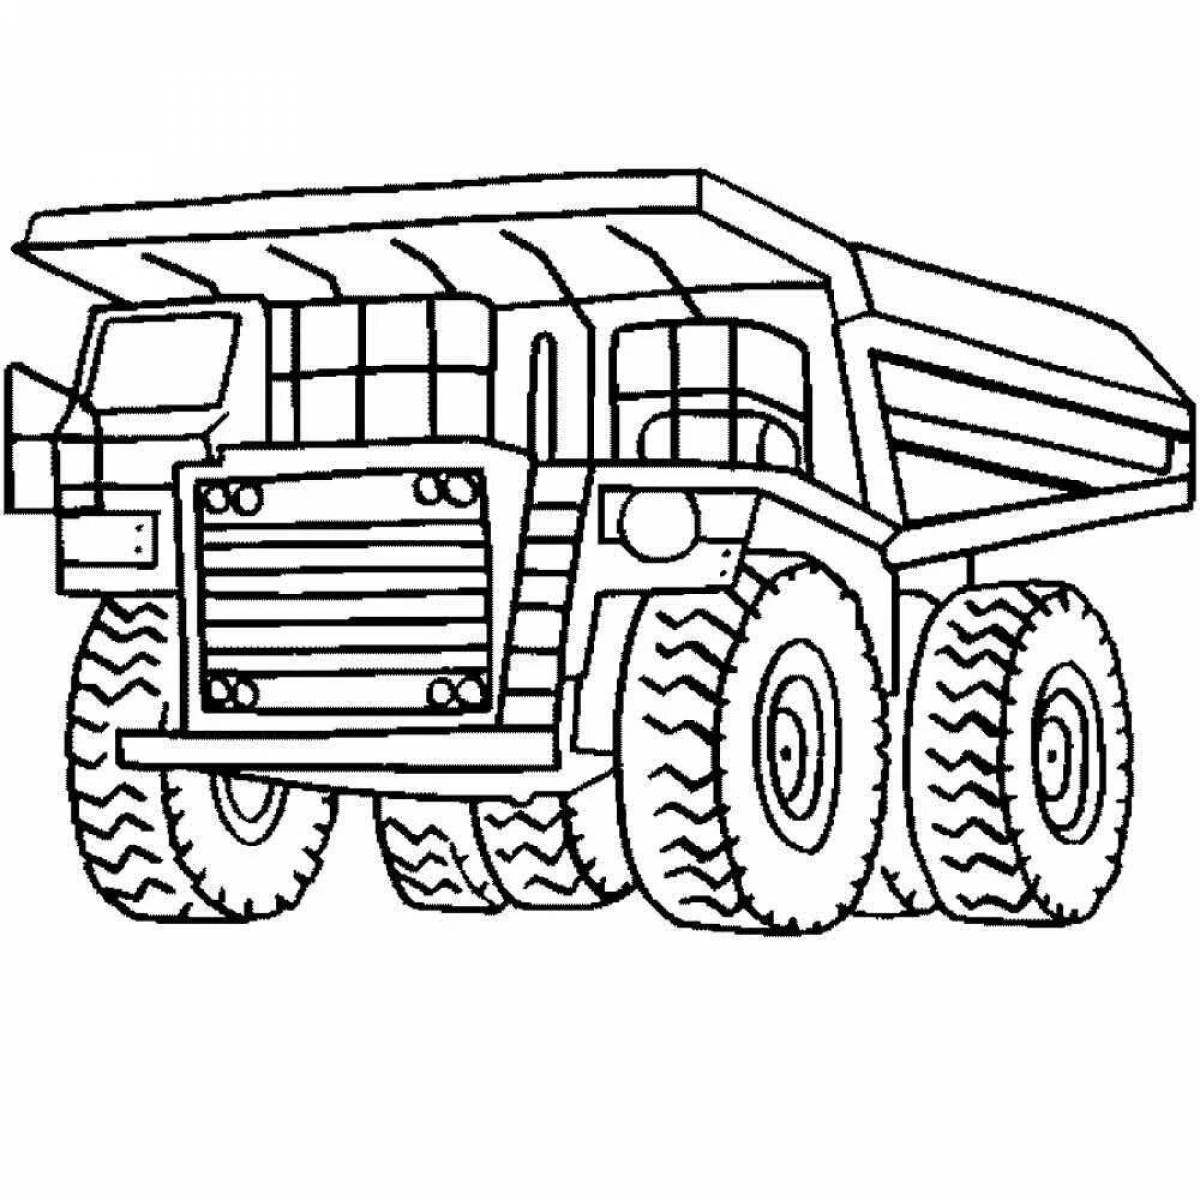 Colorful military truck coloring pages for kids